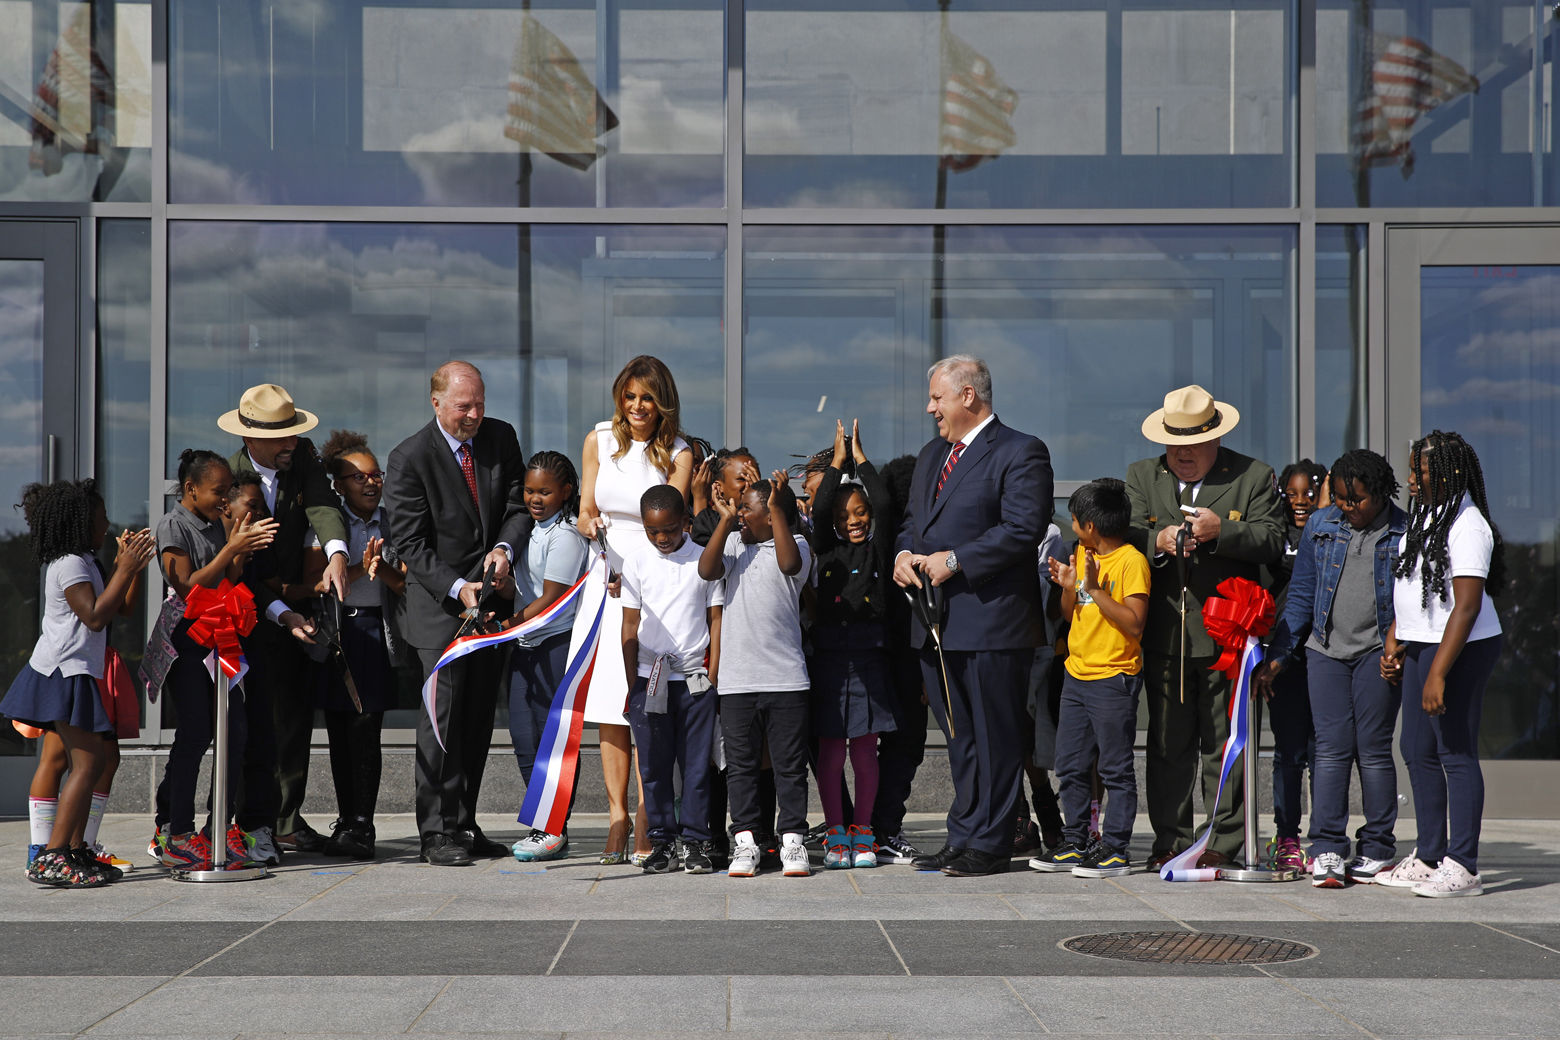 First lady Melania Trump participates in a ribbon-cutting ceremony to re-open the Washington Monument, Thursday, Sept. 19, 2019, in Washington. The monument has been closed to the public for renovations since August 2016. Trump was joined by students from Amidon-Bowen Elementary School in Washington. (AP Photo/Patrick Semansky)